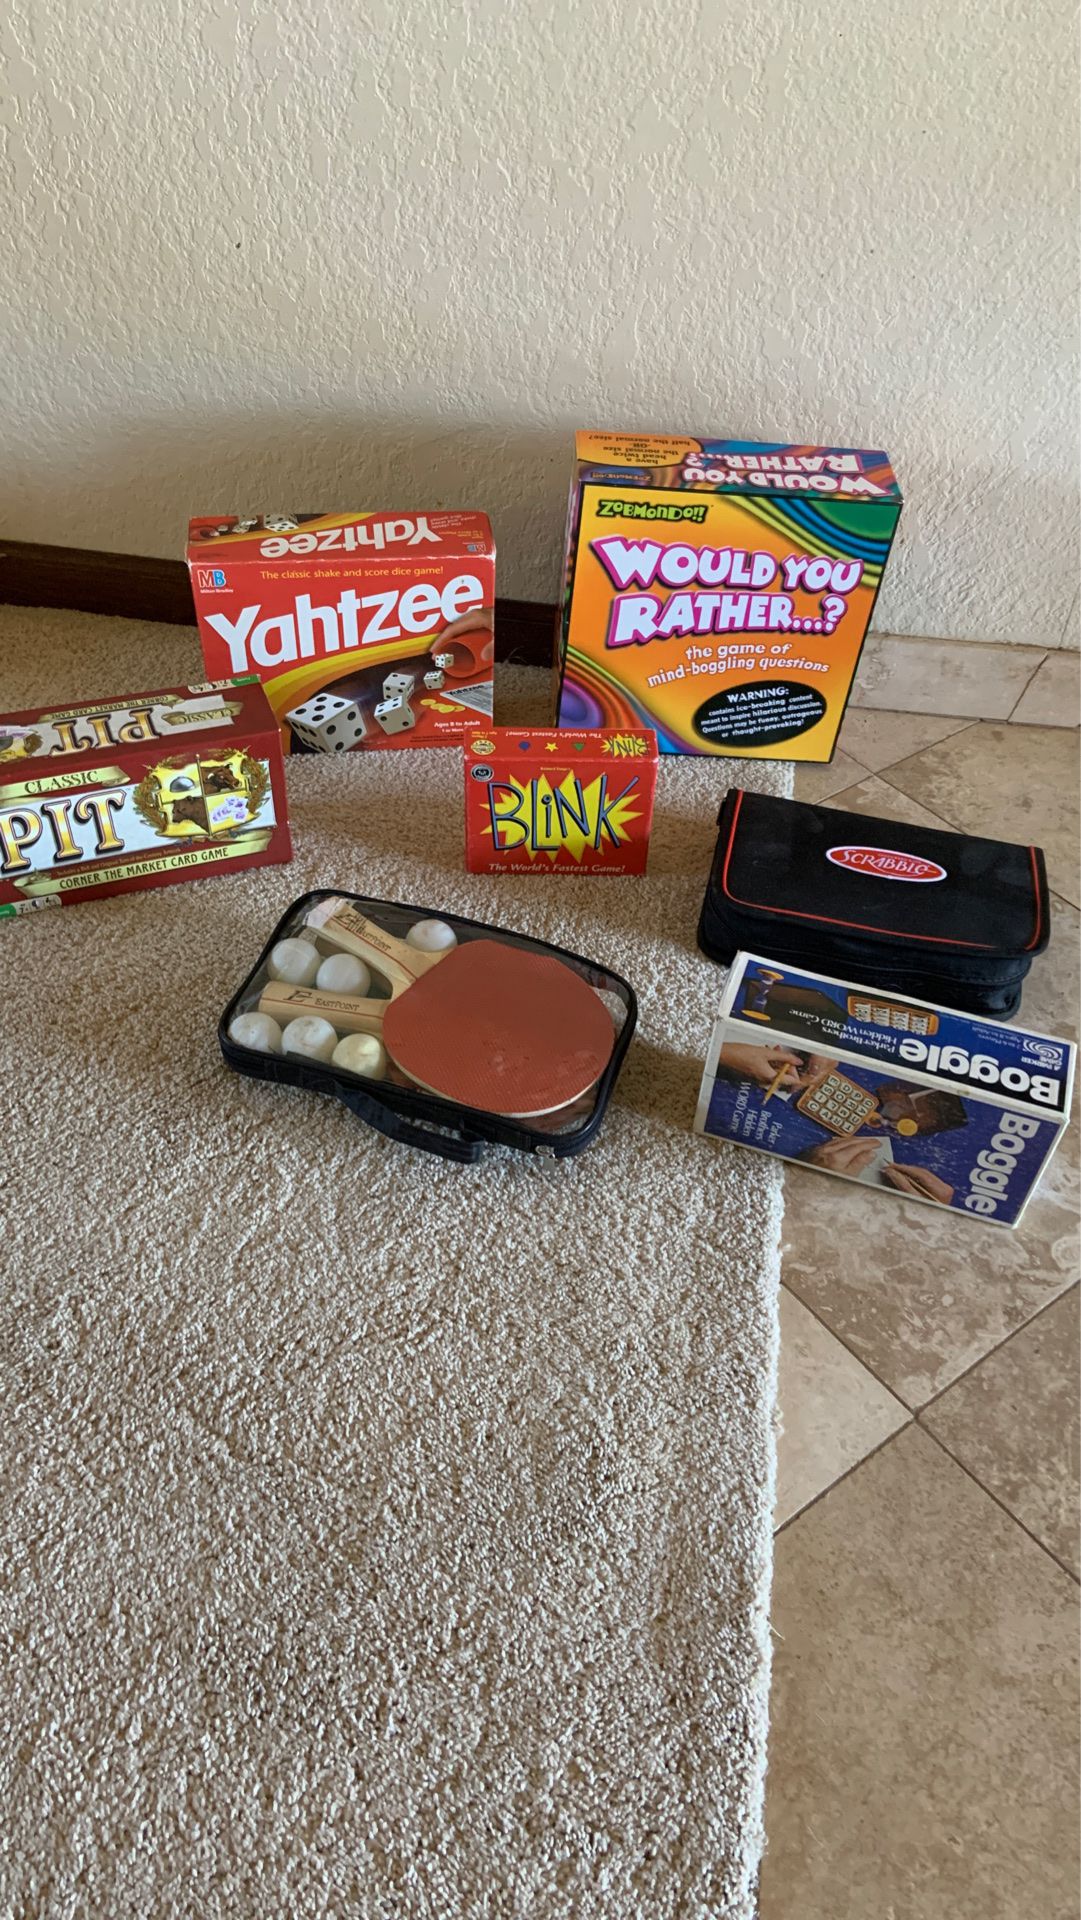 Classic board and dice games plus Ping Pong set – $20 for all